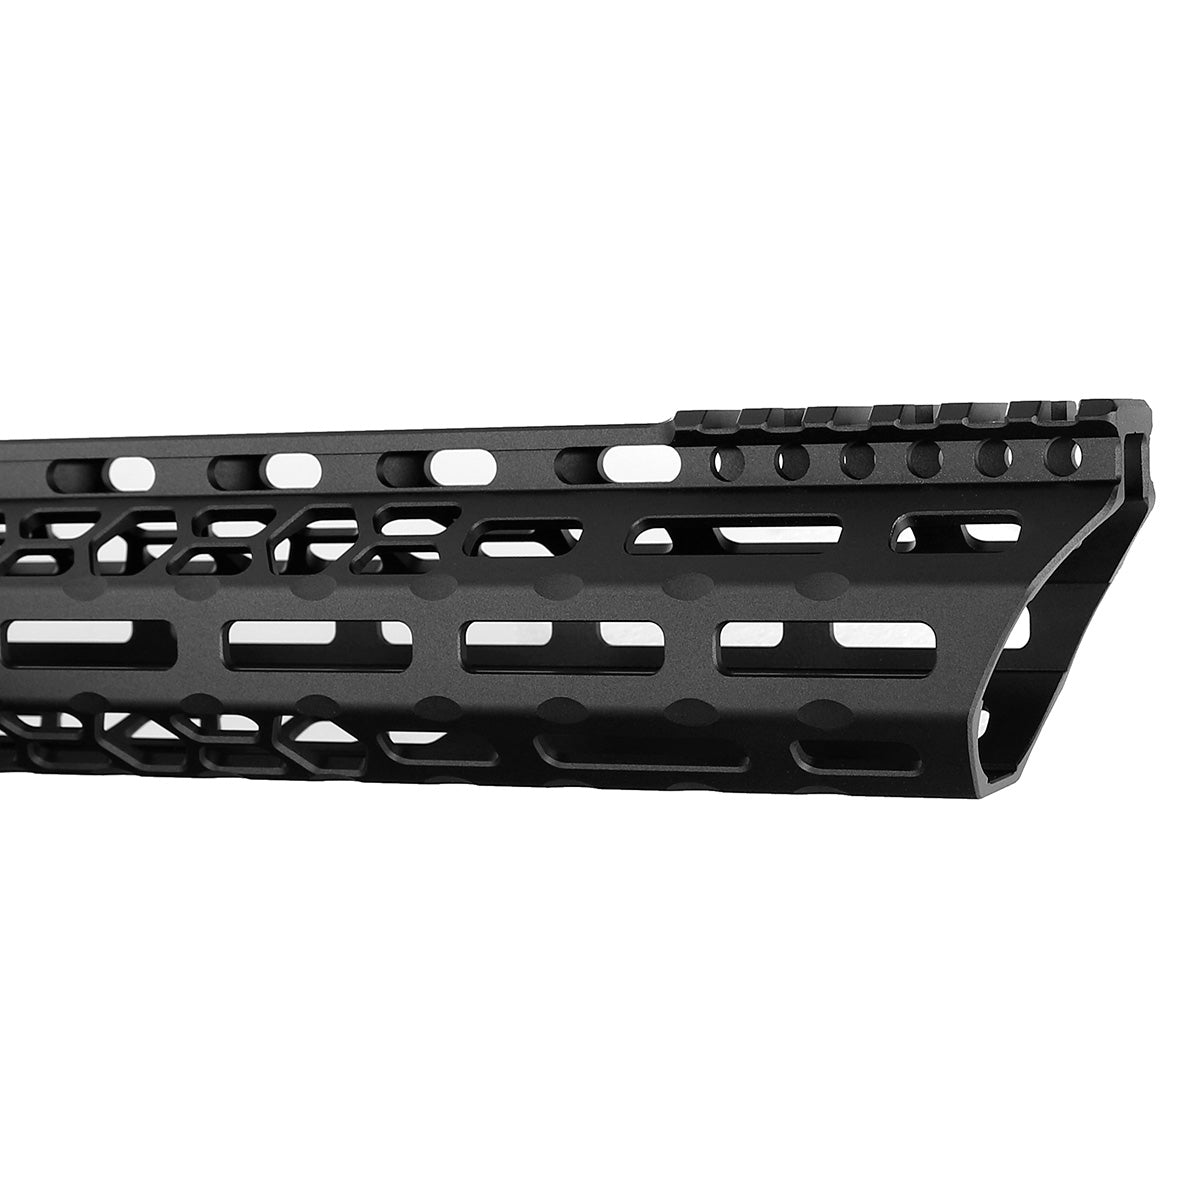 ohhunt® High Profile AR-10 LR-308 Handguard with Angle Cut Front - 15 inch